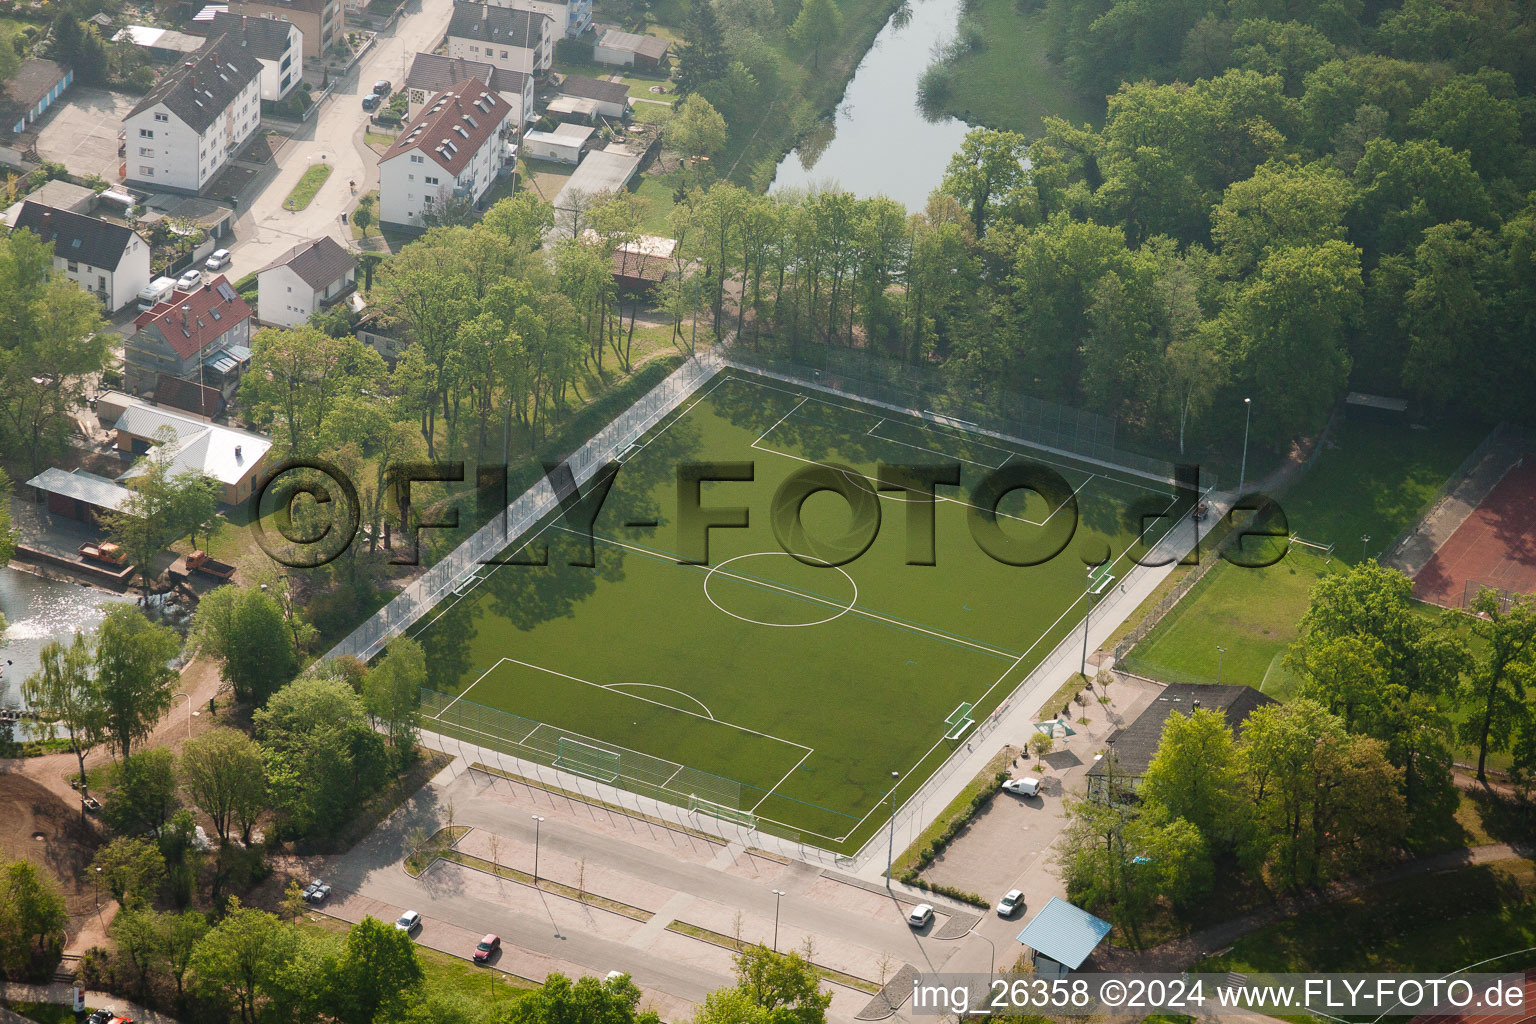 Artificial turf pitch in Kandel in the state Rhineland-Palatinate, Germany